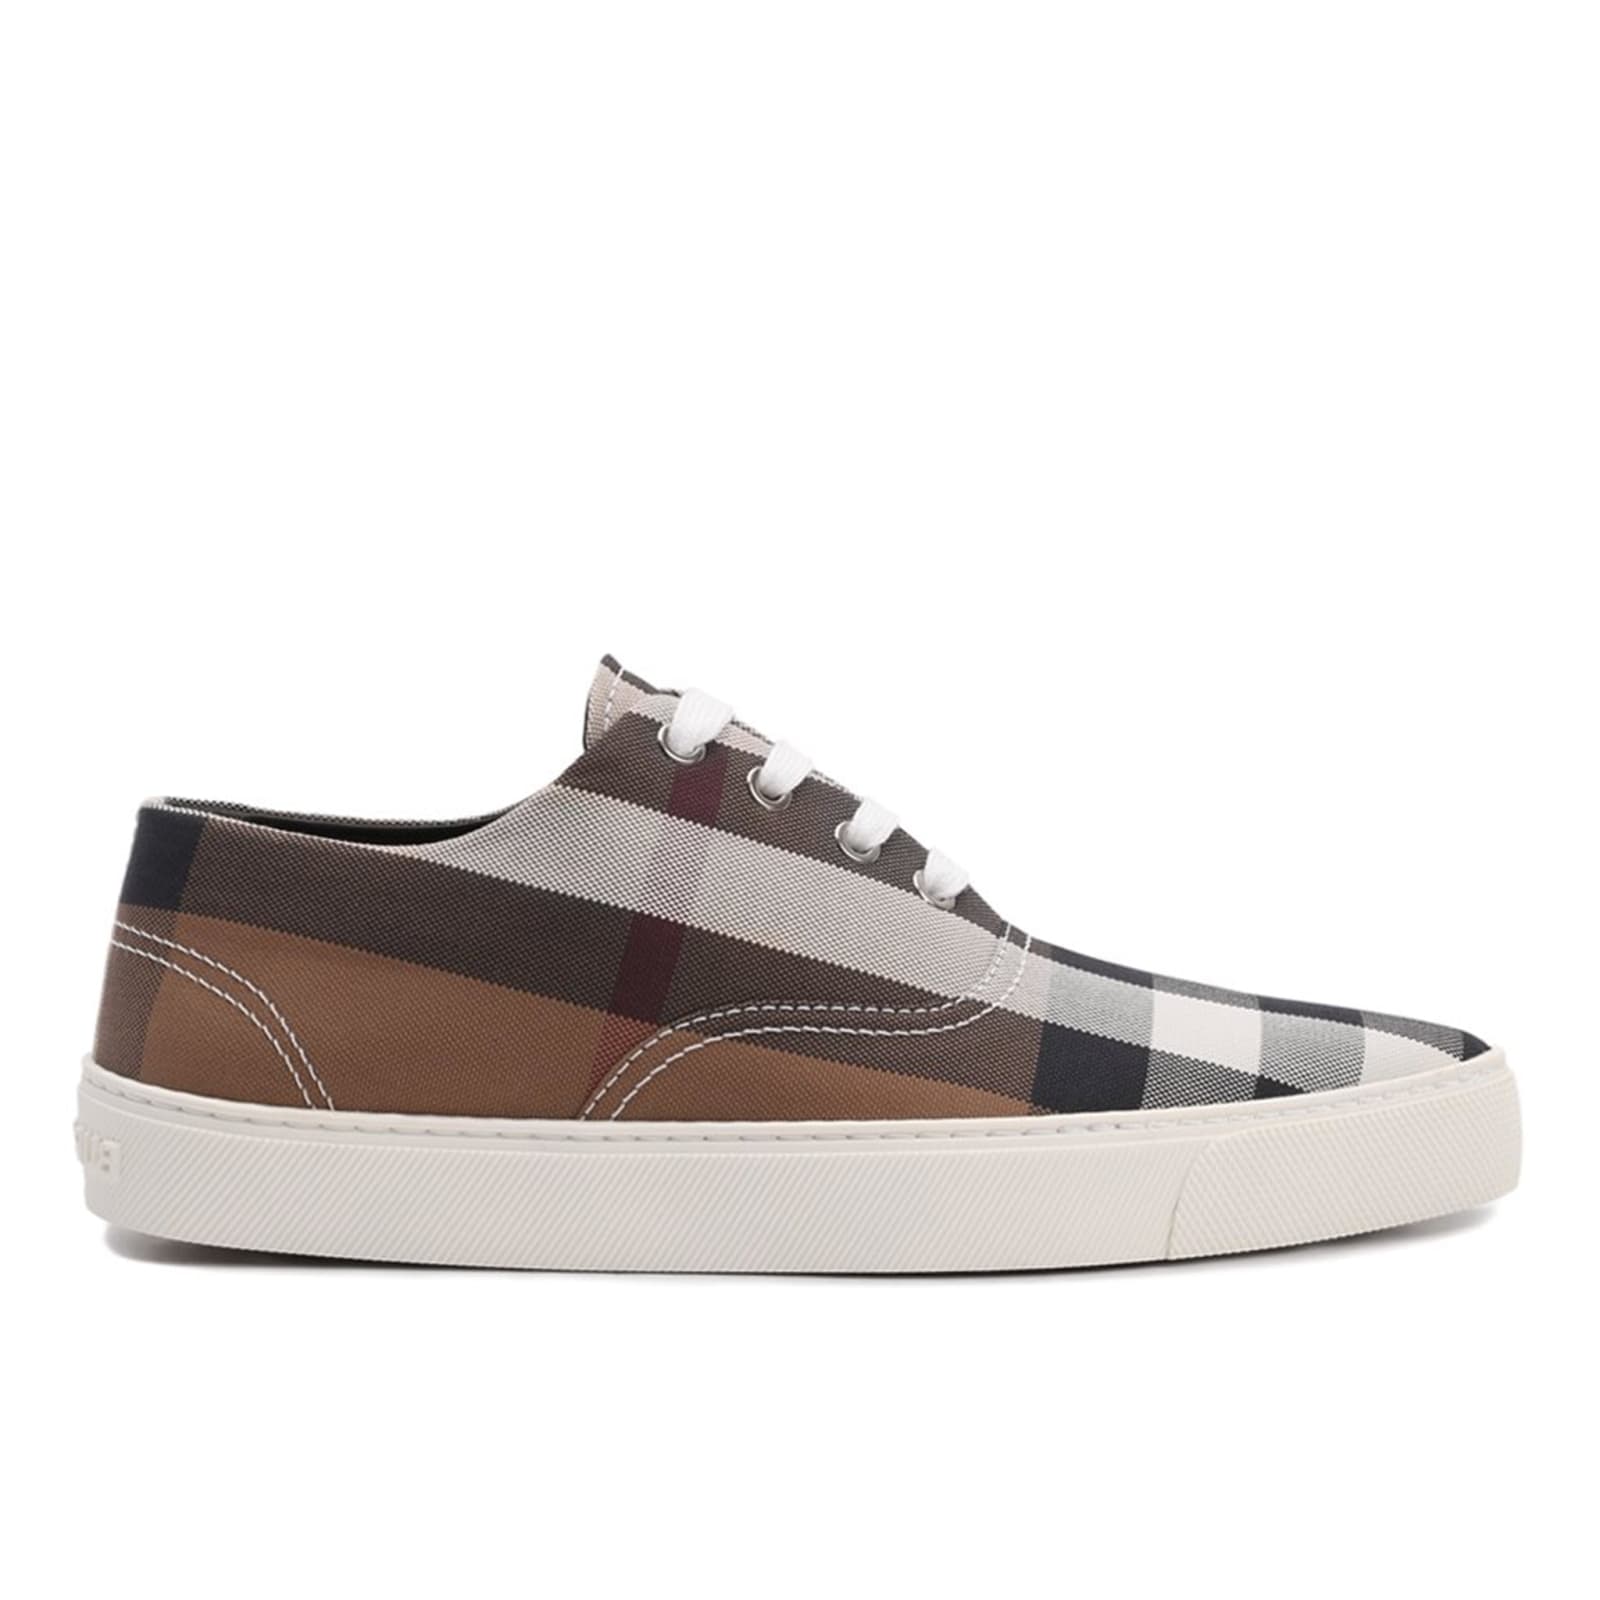 Burberry Check Print Sneakers